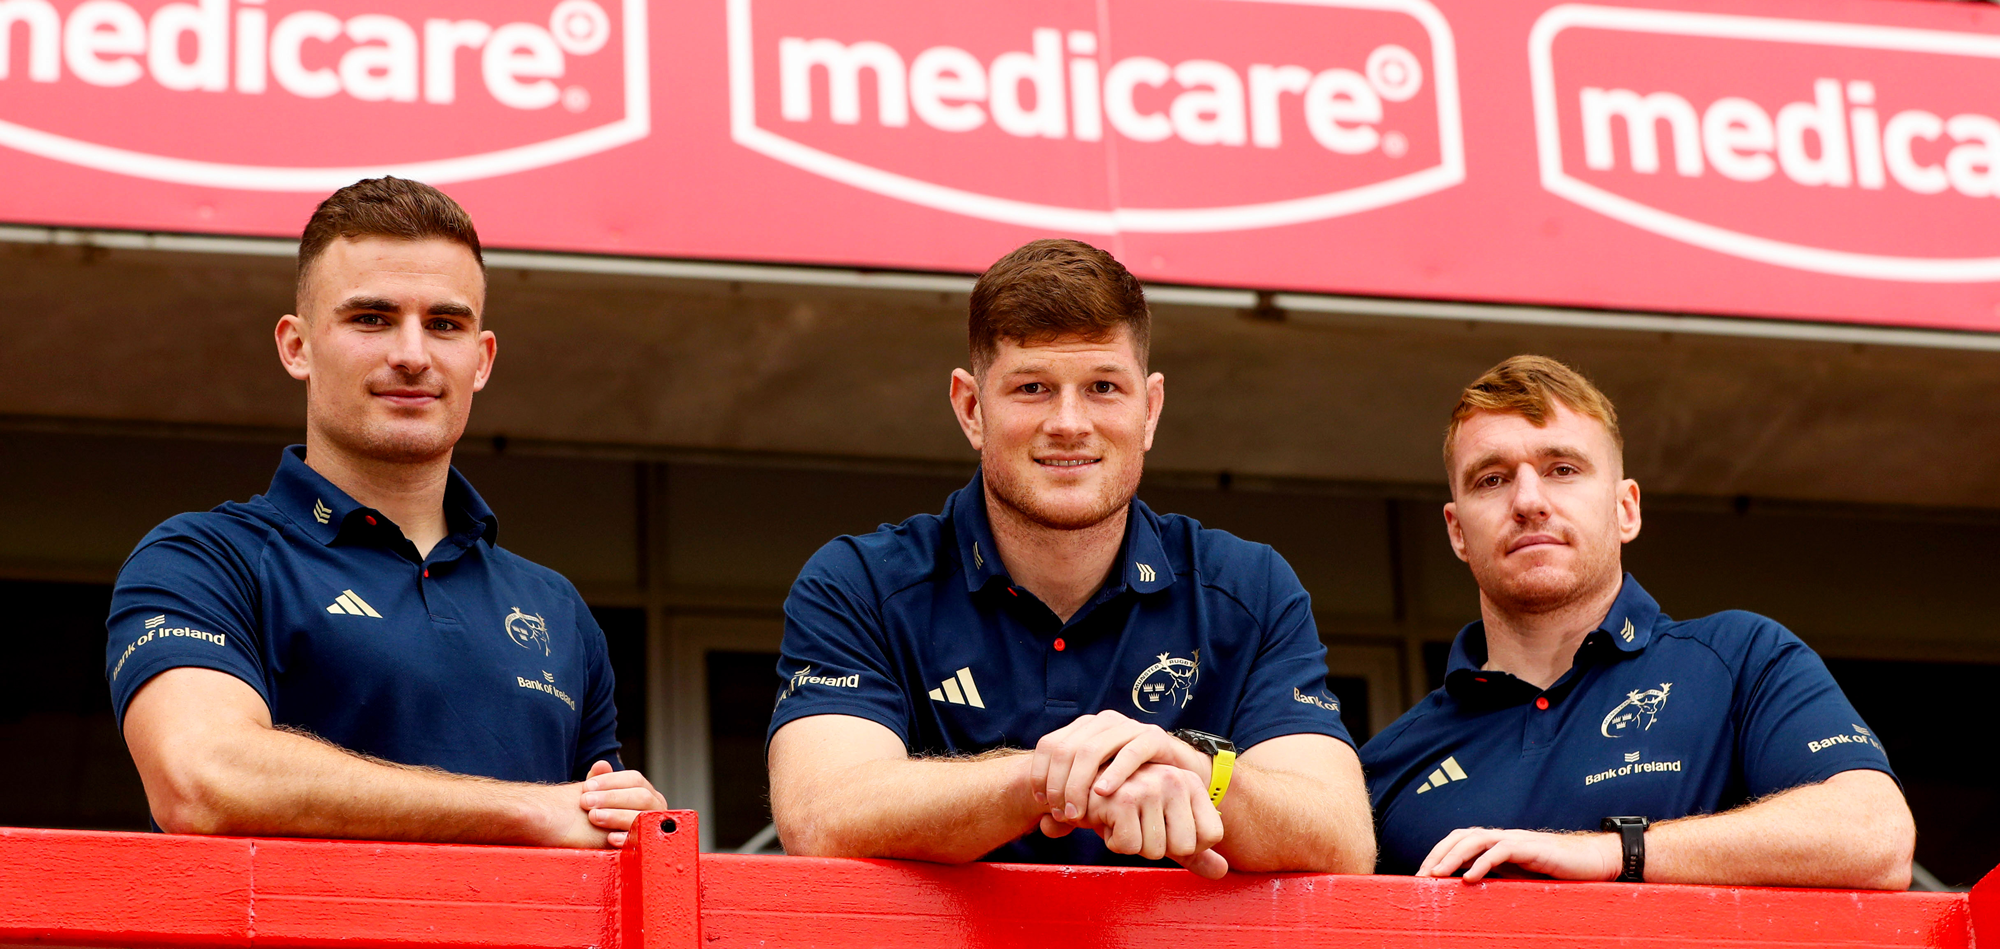 Munster Rugby players promoting the Medicare brand with Fleming Medical